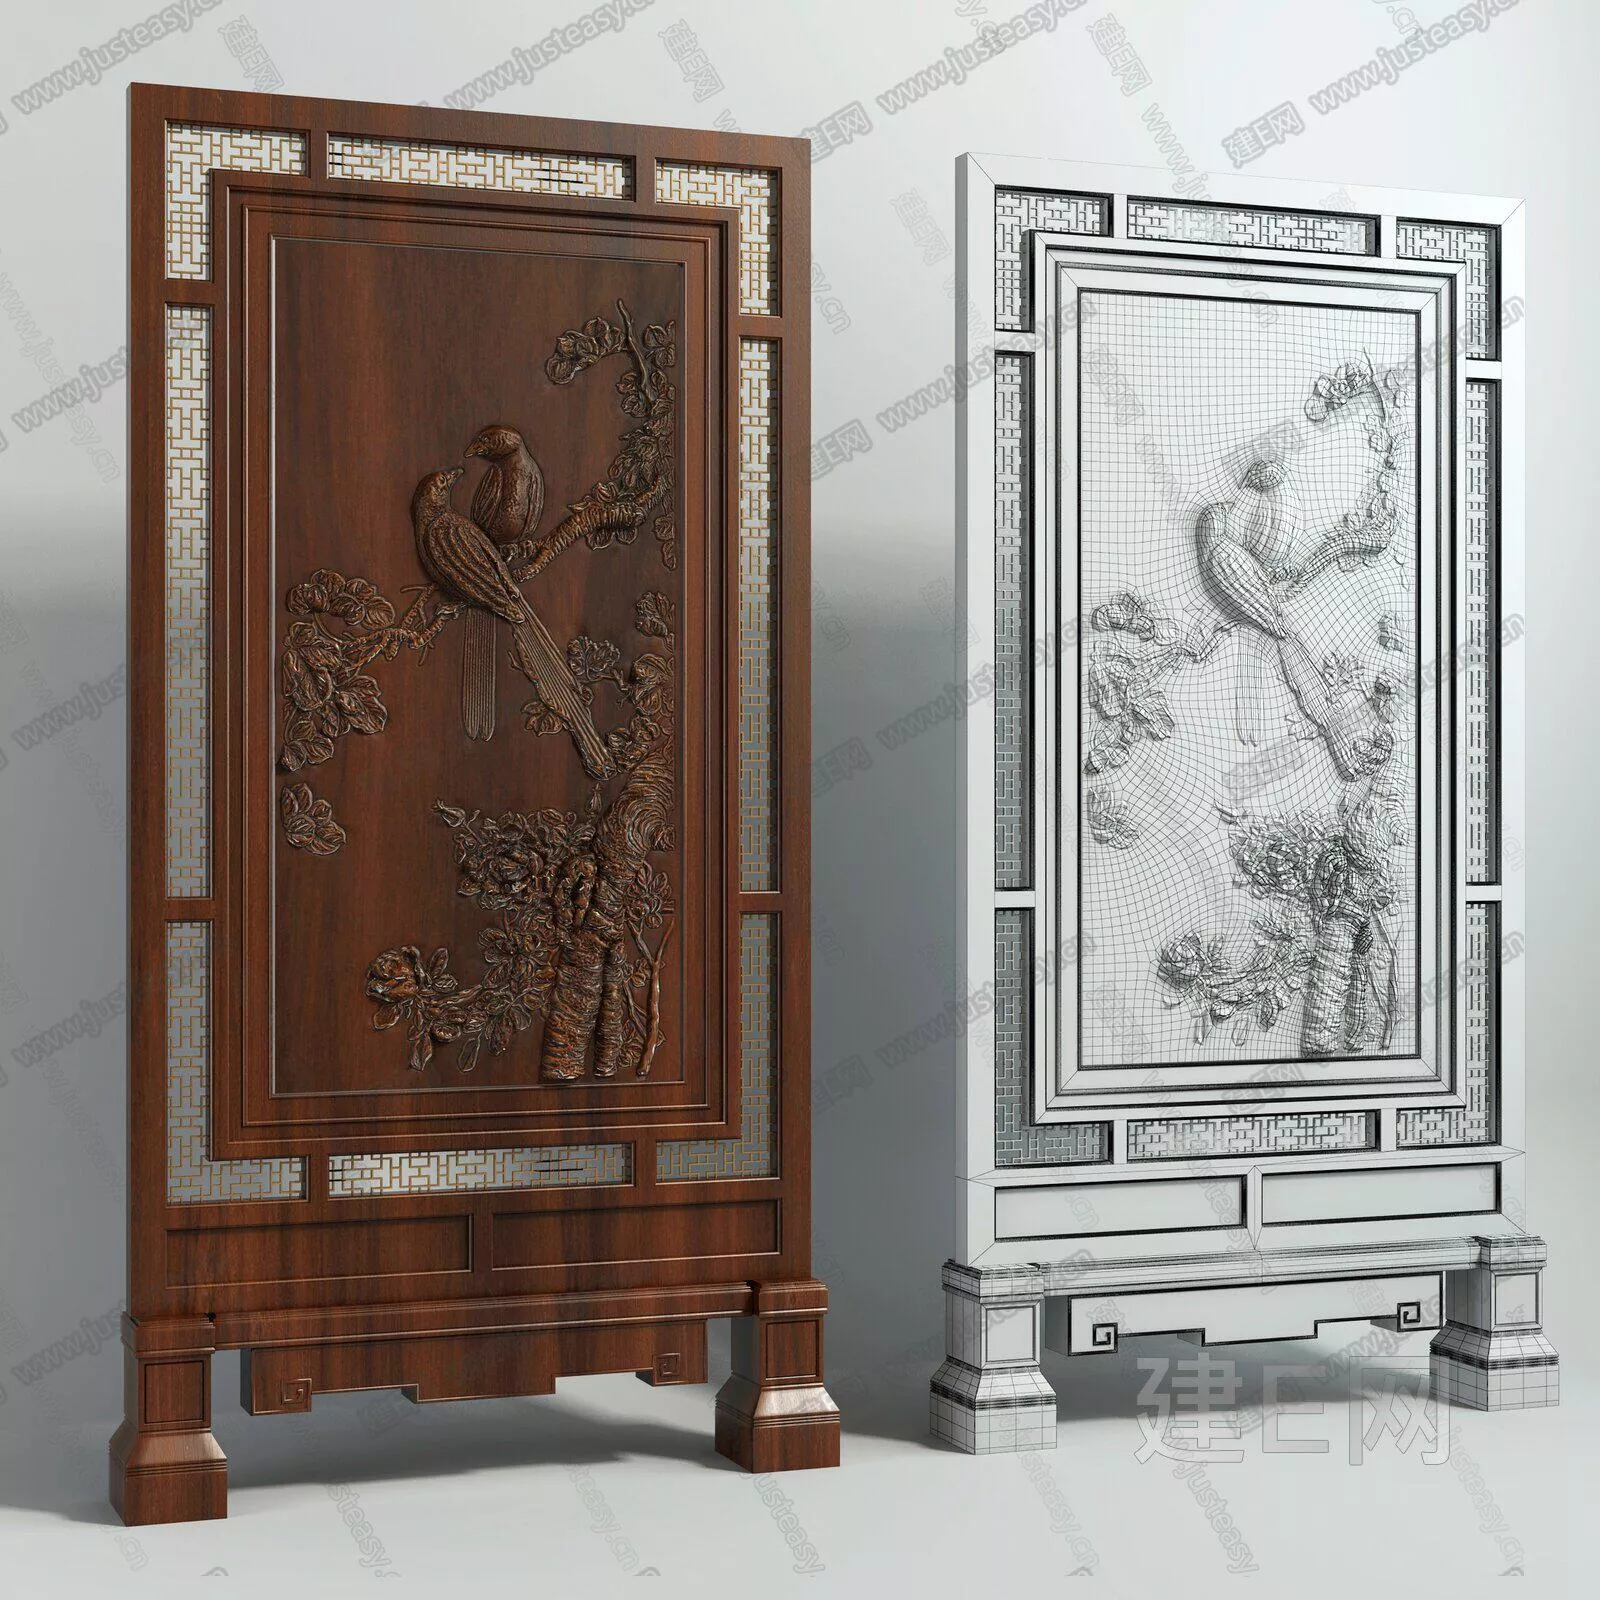 CHINESE PARTITION SCREEN - SKETCHUP 3D MODEL - ENSCAPE - 111430927